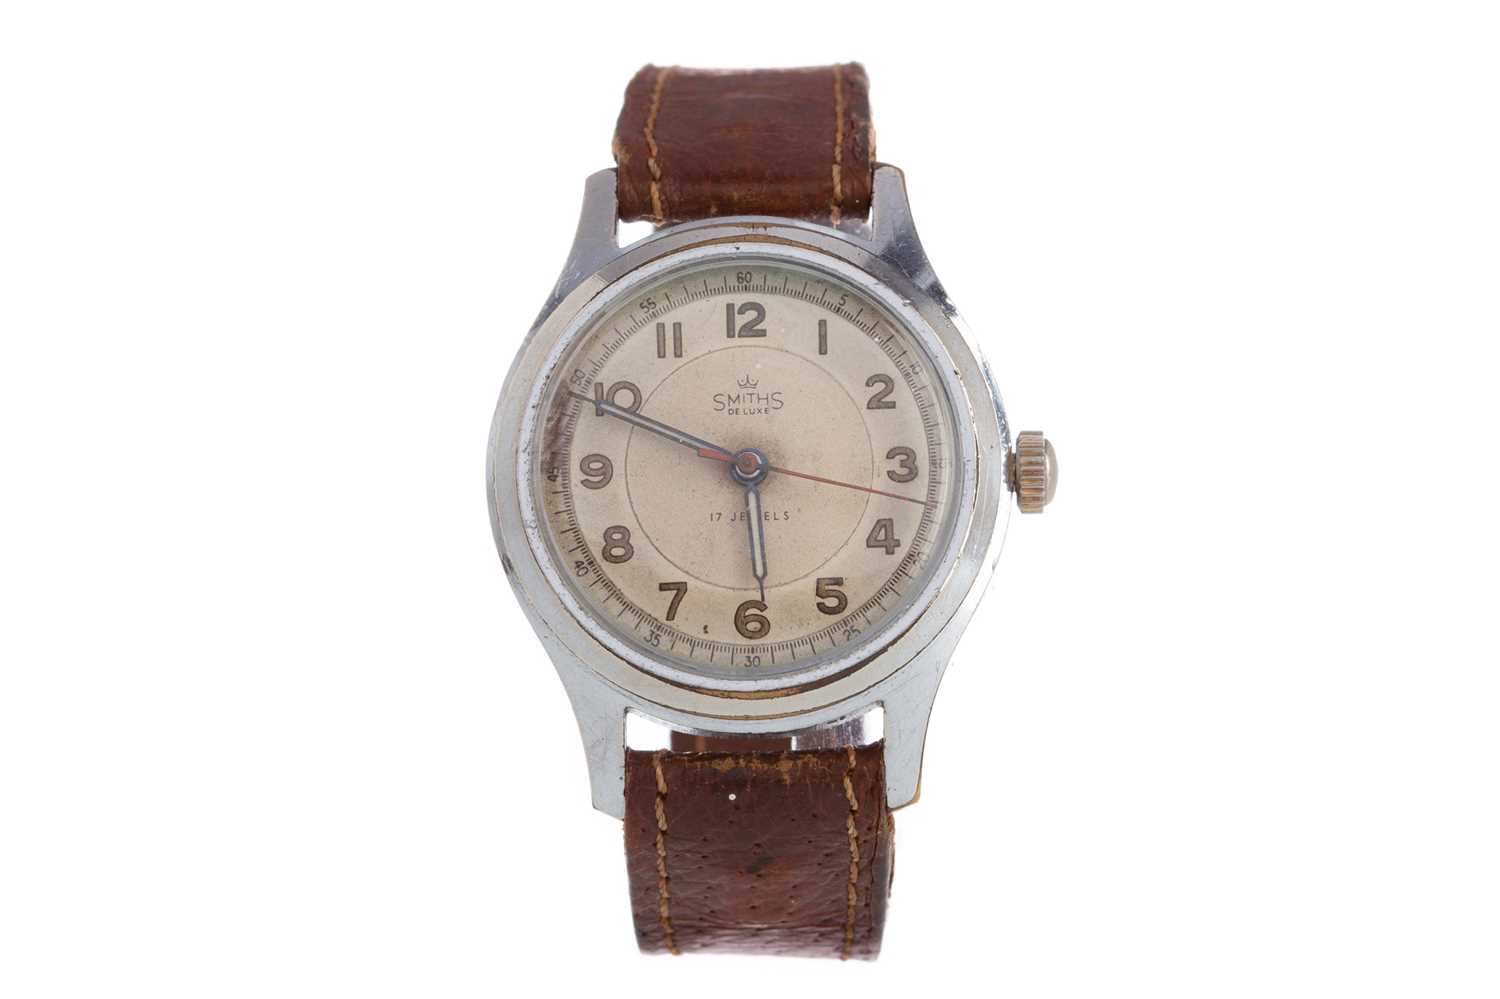 Lot 830 - A GENTLEMAN'S SMITHS ANTARTIC DELUXE CHROME PLATED MANUAL WIND WRIST WATCH